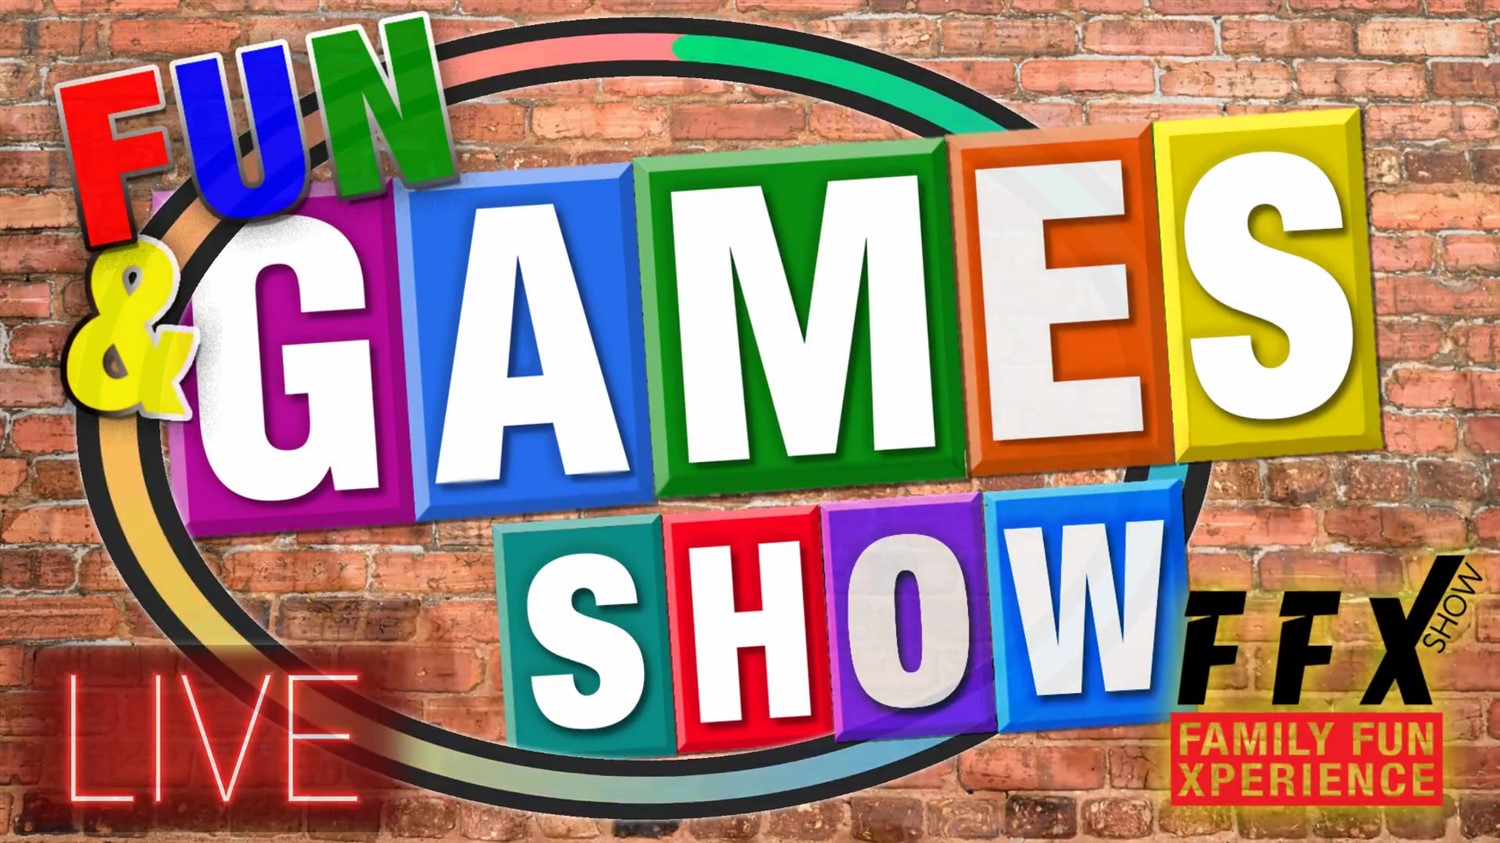 FUN & GAMES SHOW! (matinee) 5 Star Fun for the whole family! on Aug 18, 19:00@FFX Theatre - Pick a seat, Buy tickets and Get information on Family Fun Xperience tickets.ffxshow.org